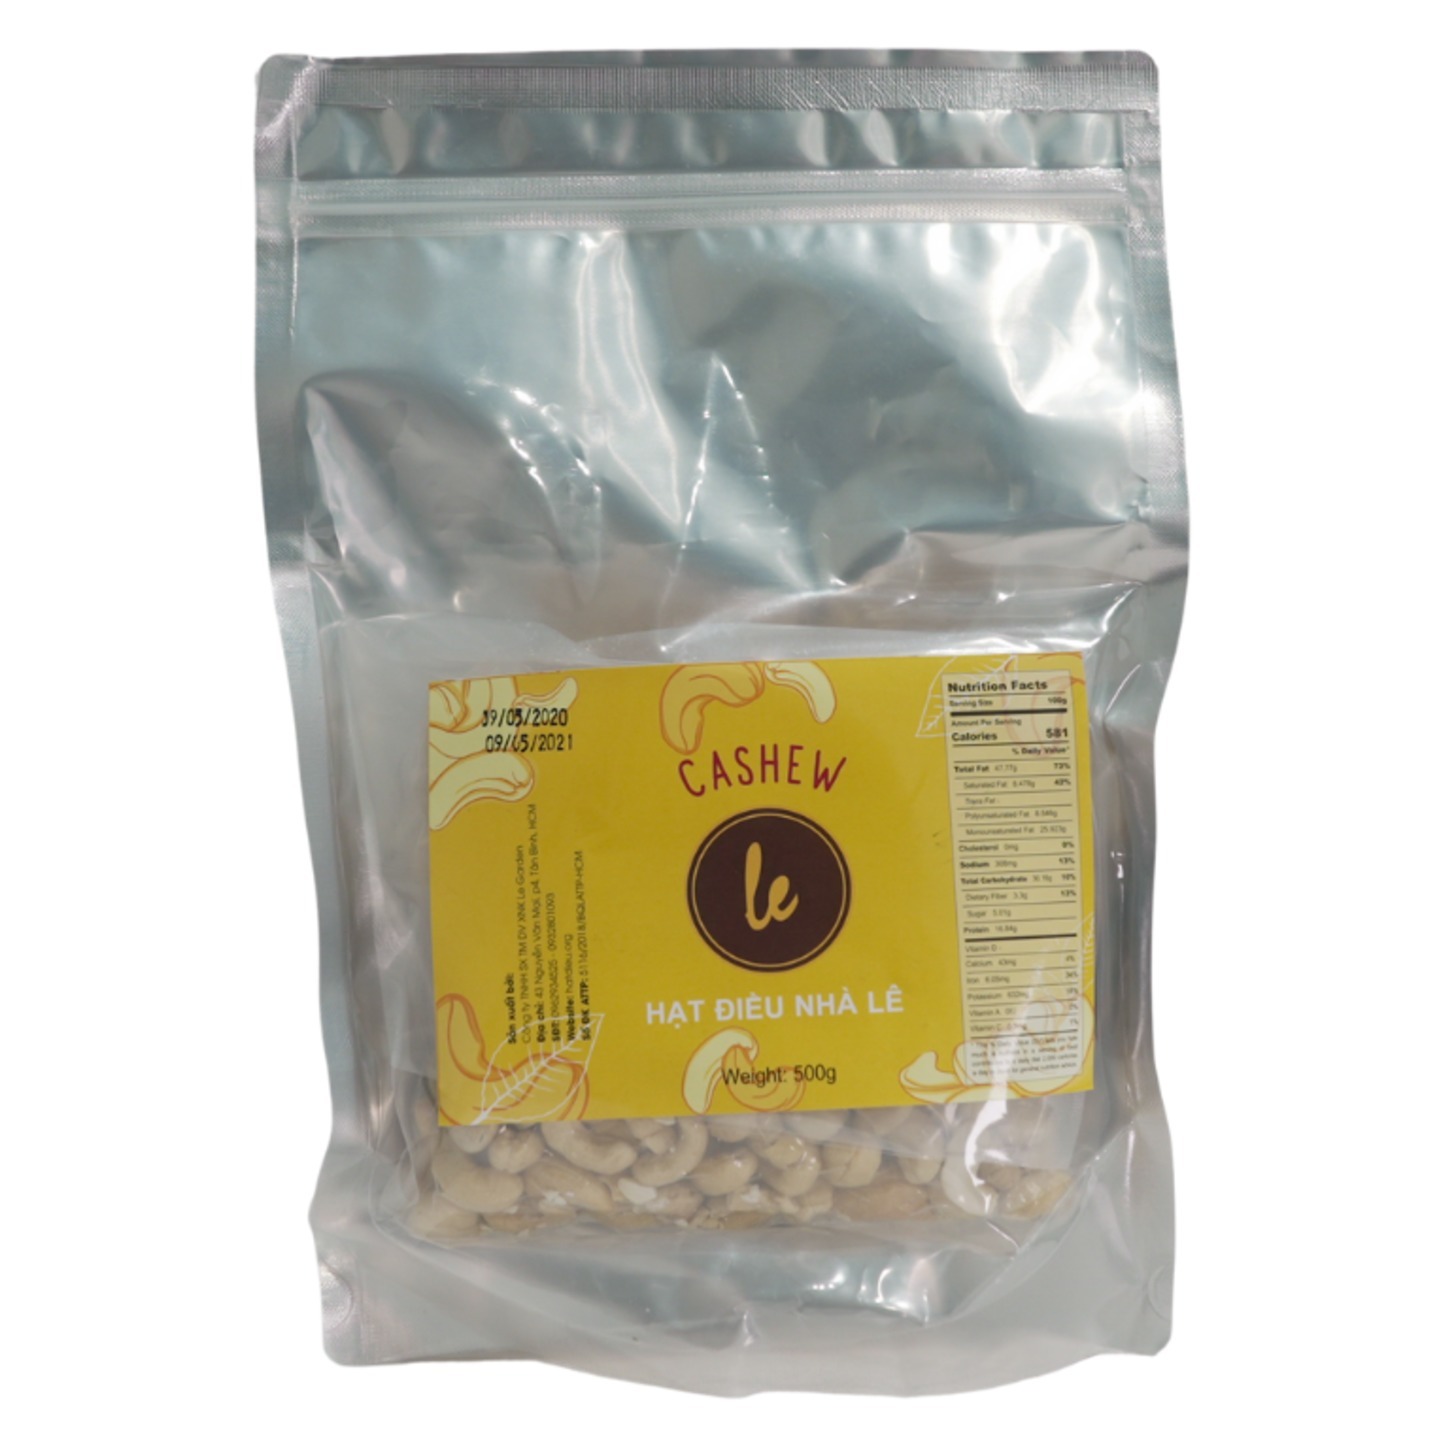 Cashew nuts - Skinless Unsalted